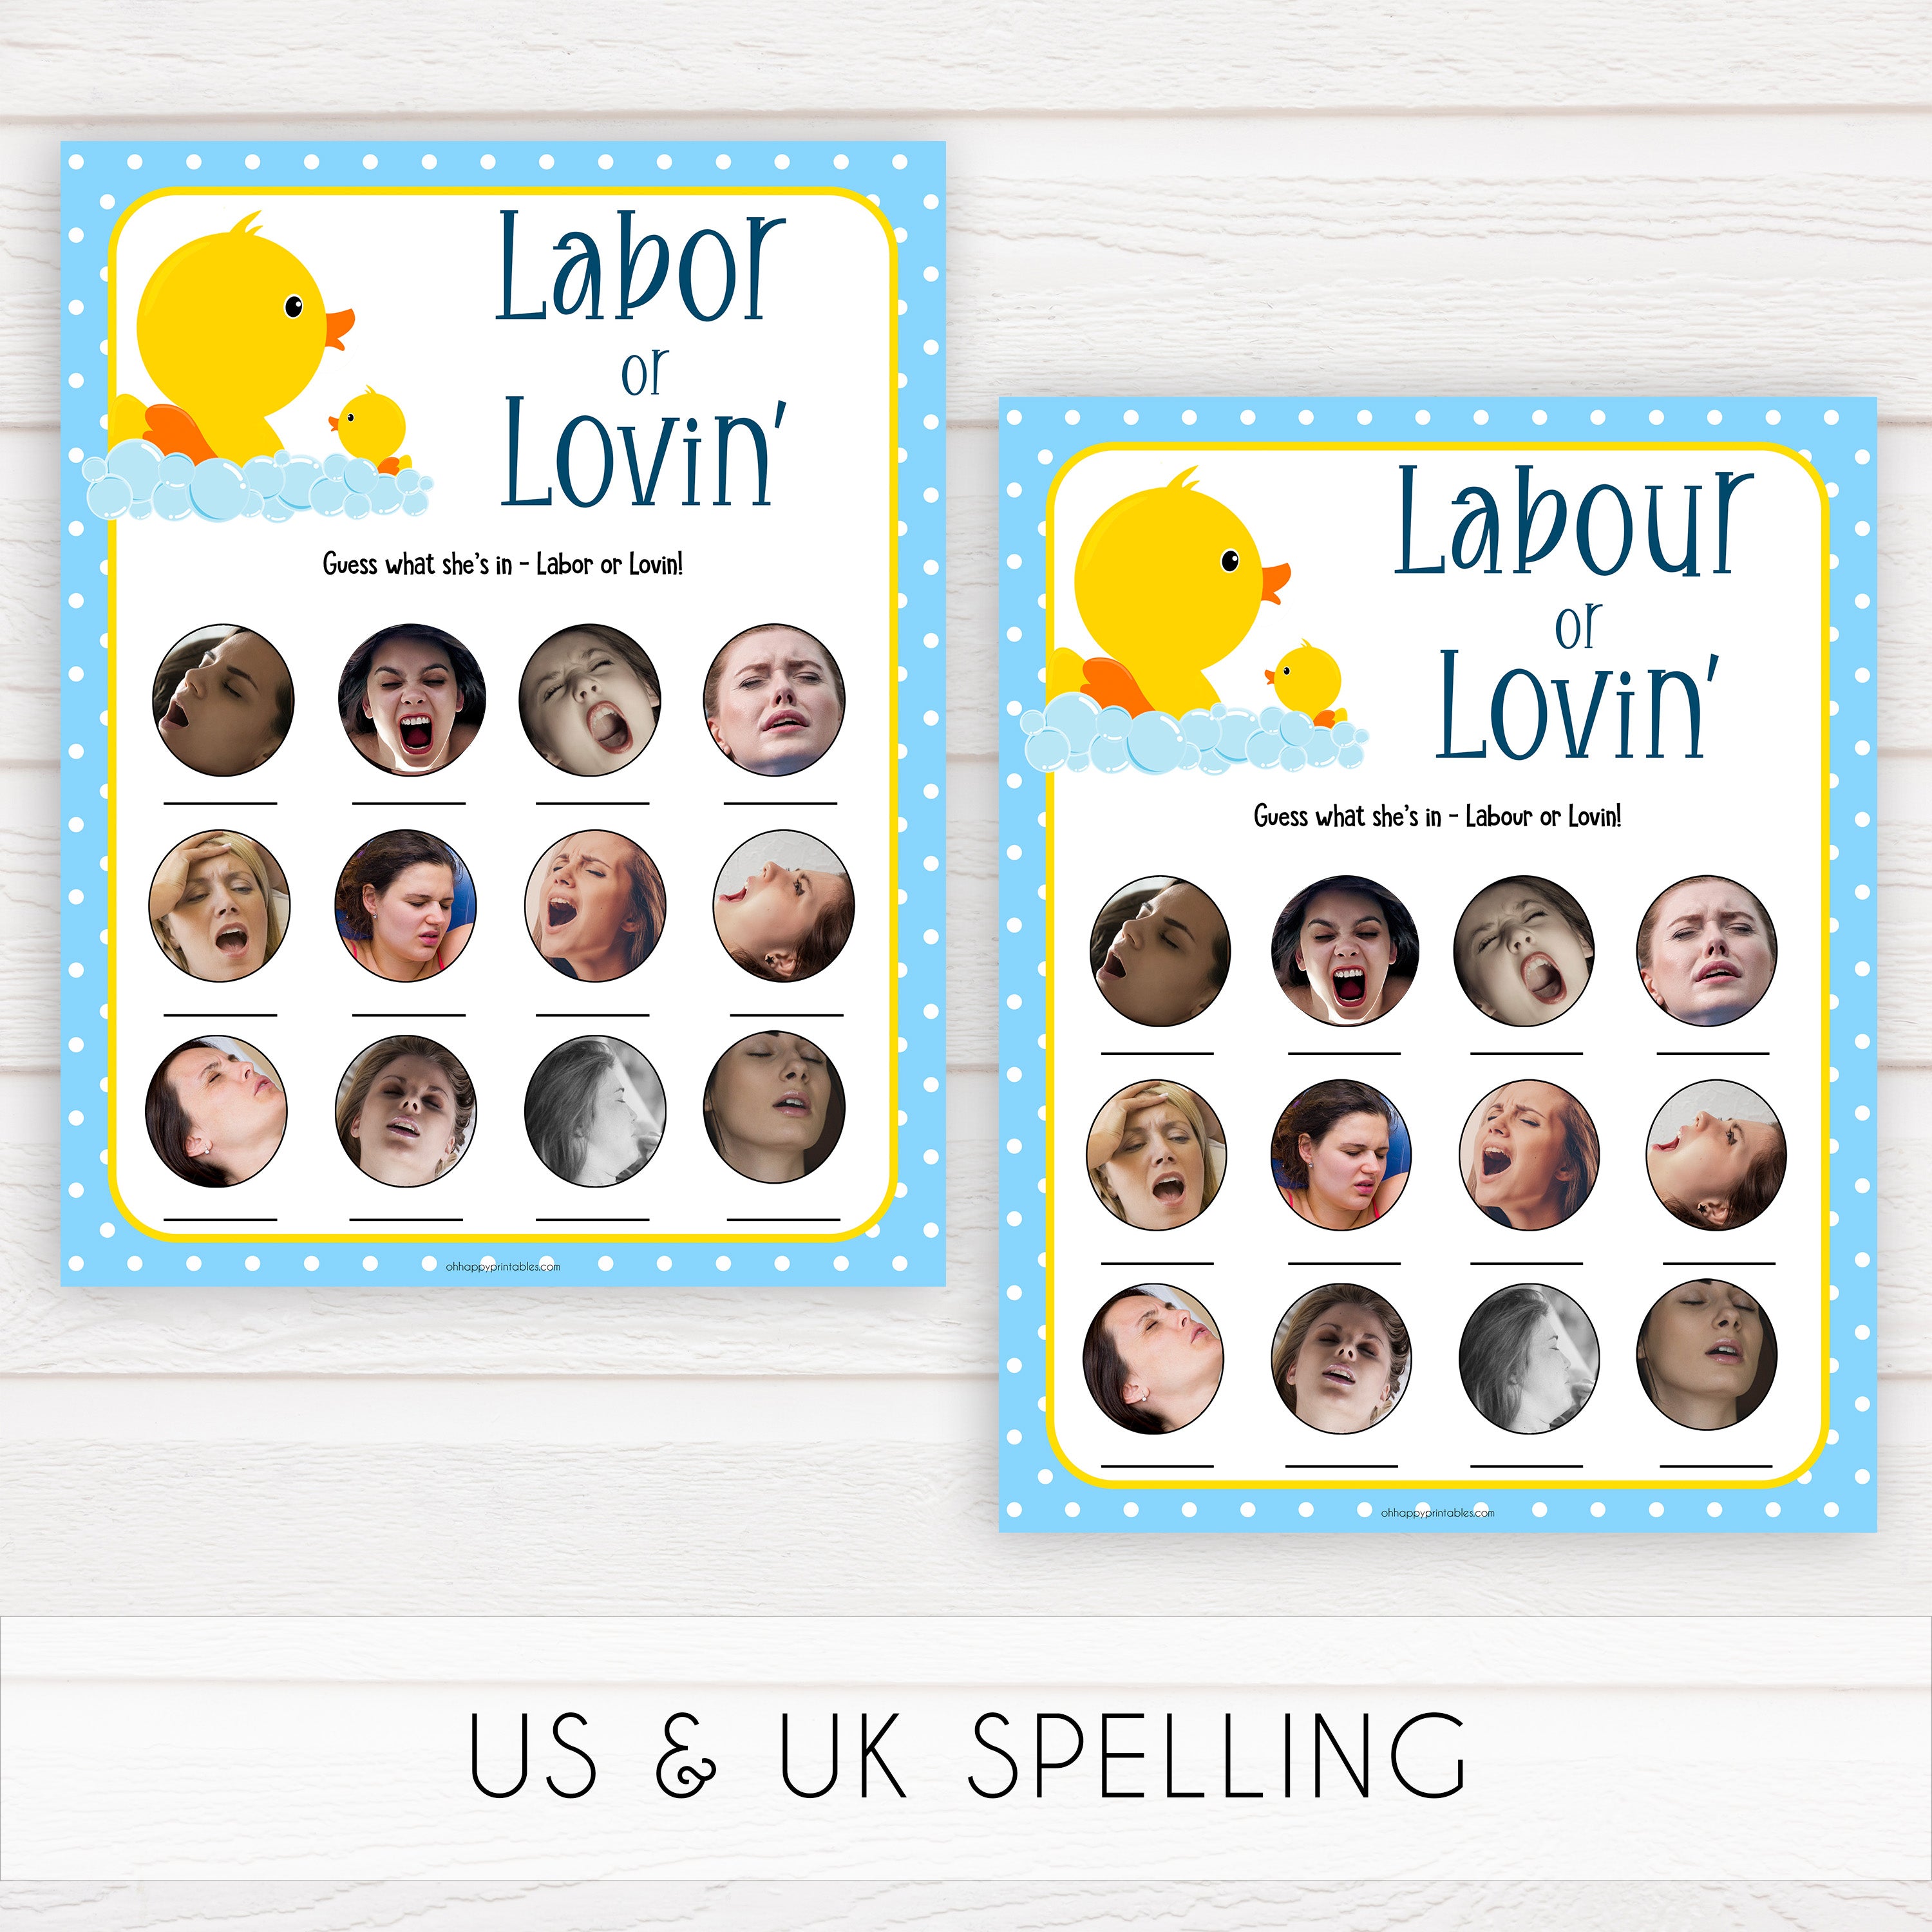 rubber ducky baby games, labour or lovin, labor or lovin, labor or porn baby game, printable baby games, baby shower games, rubber ducky baby theme, fun baby games, popular baby games